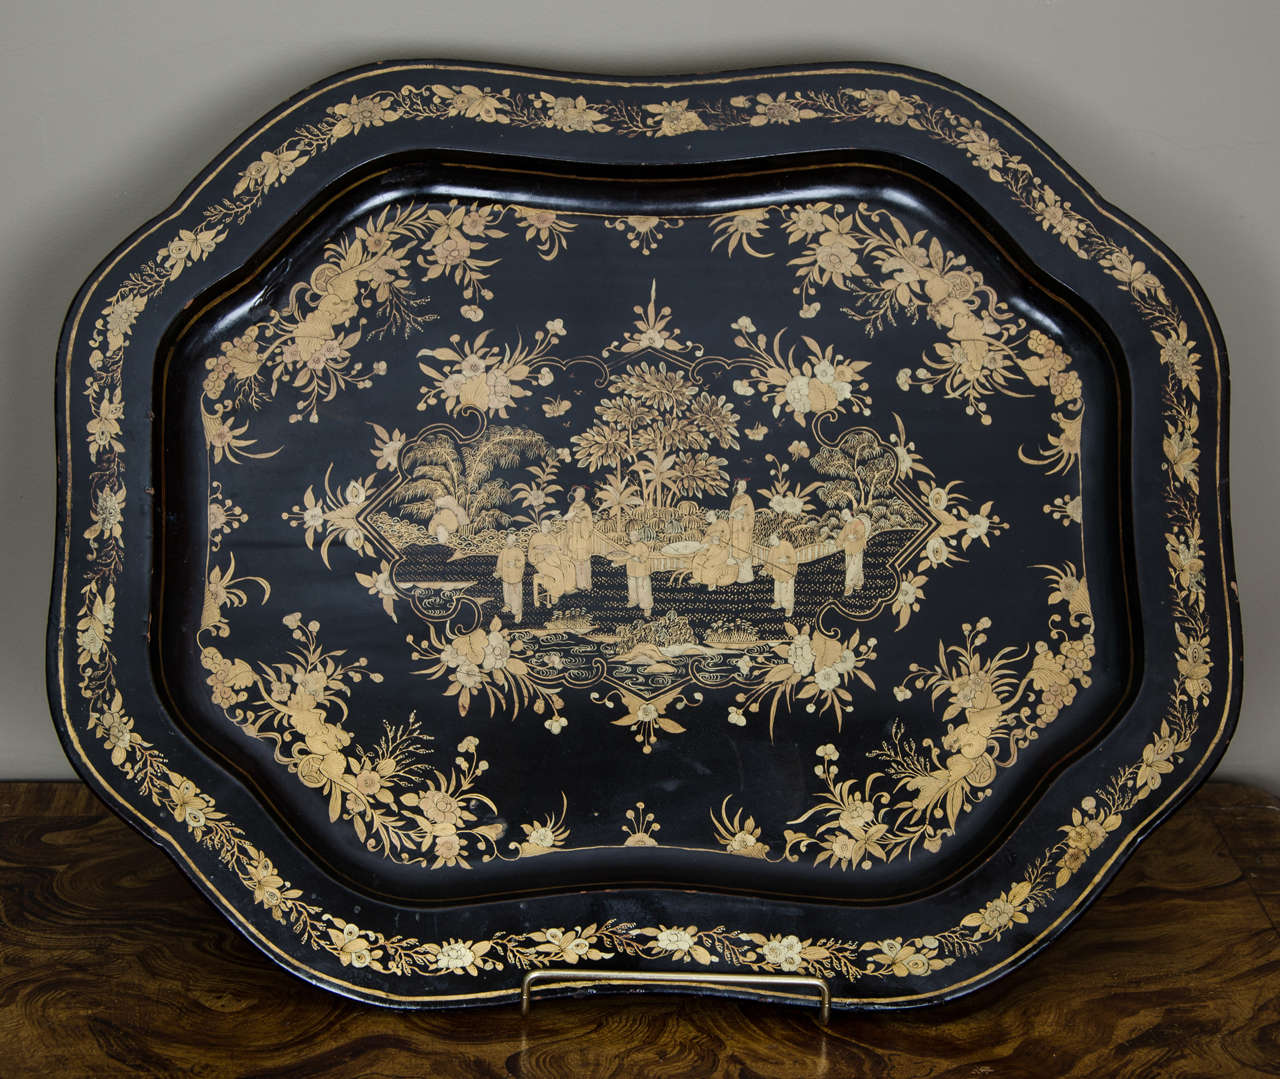 A very lovely Chinese lacquer tray made for the European market. It dates from about 1820 and is very much in the Regency taste. The tray is in very good condition, as is the gilded decoration, which is unusual as they are often worn or cracked.